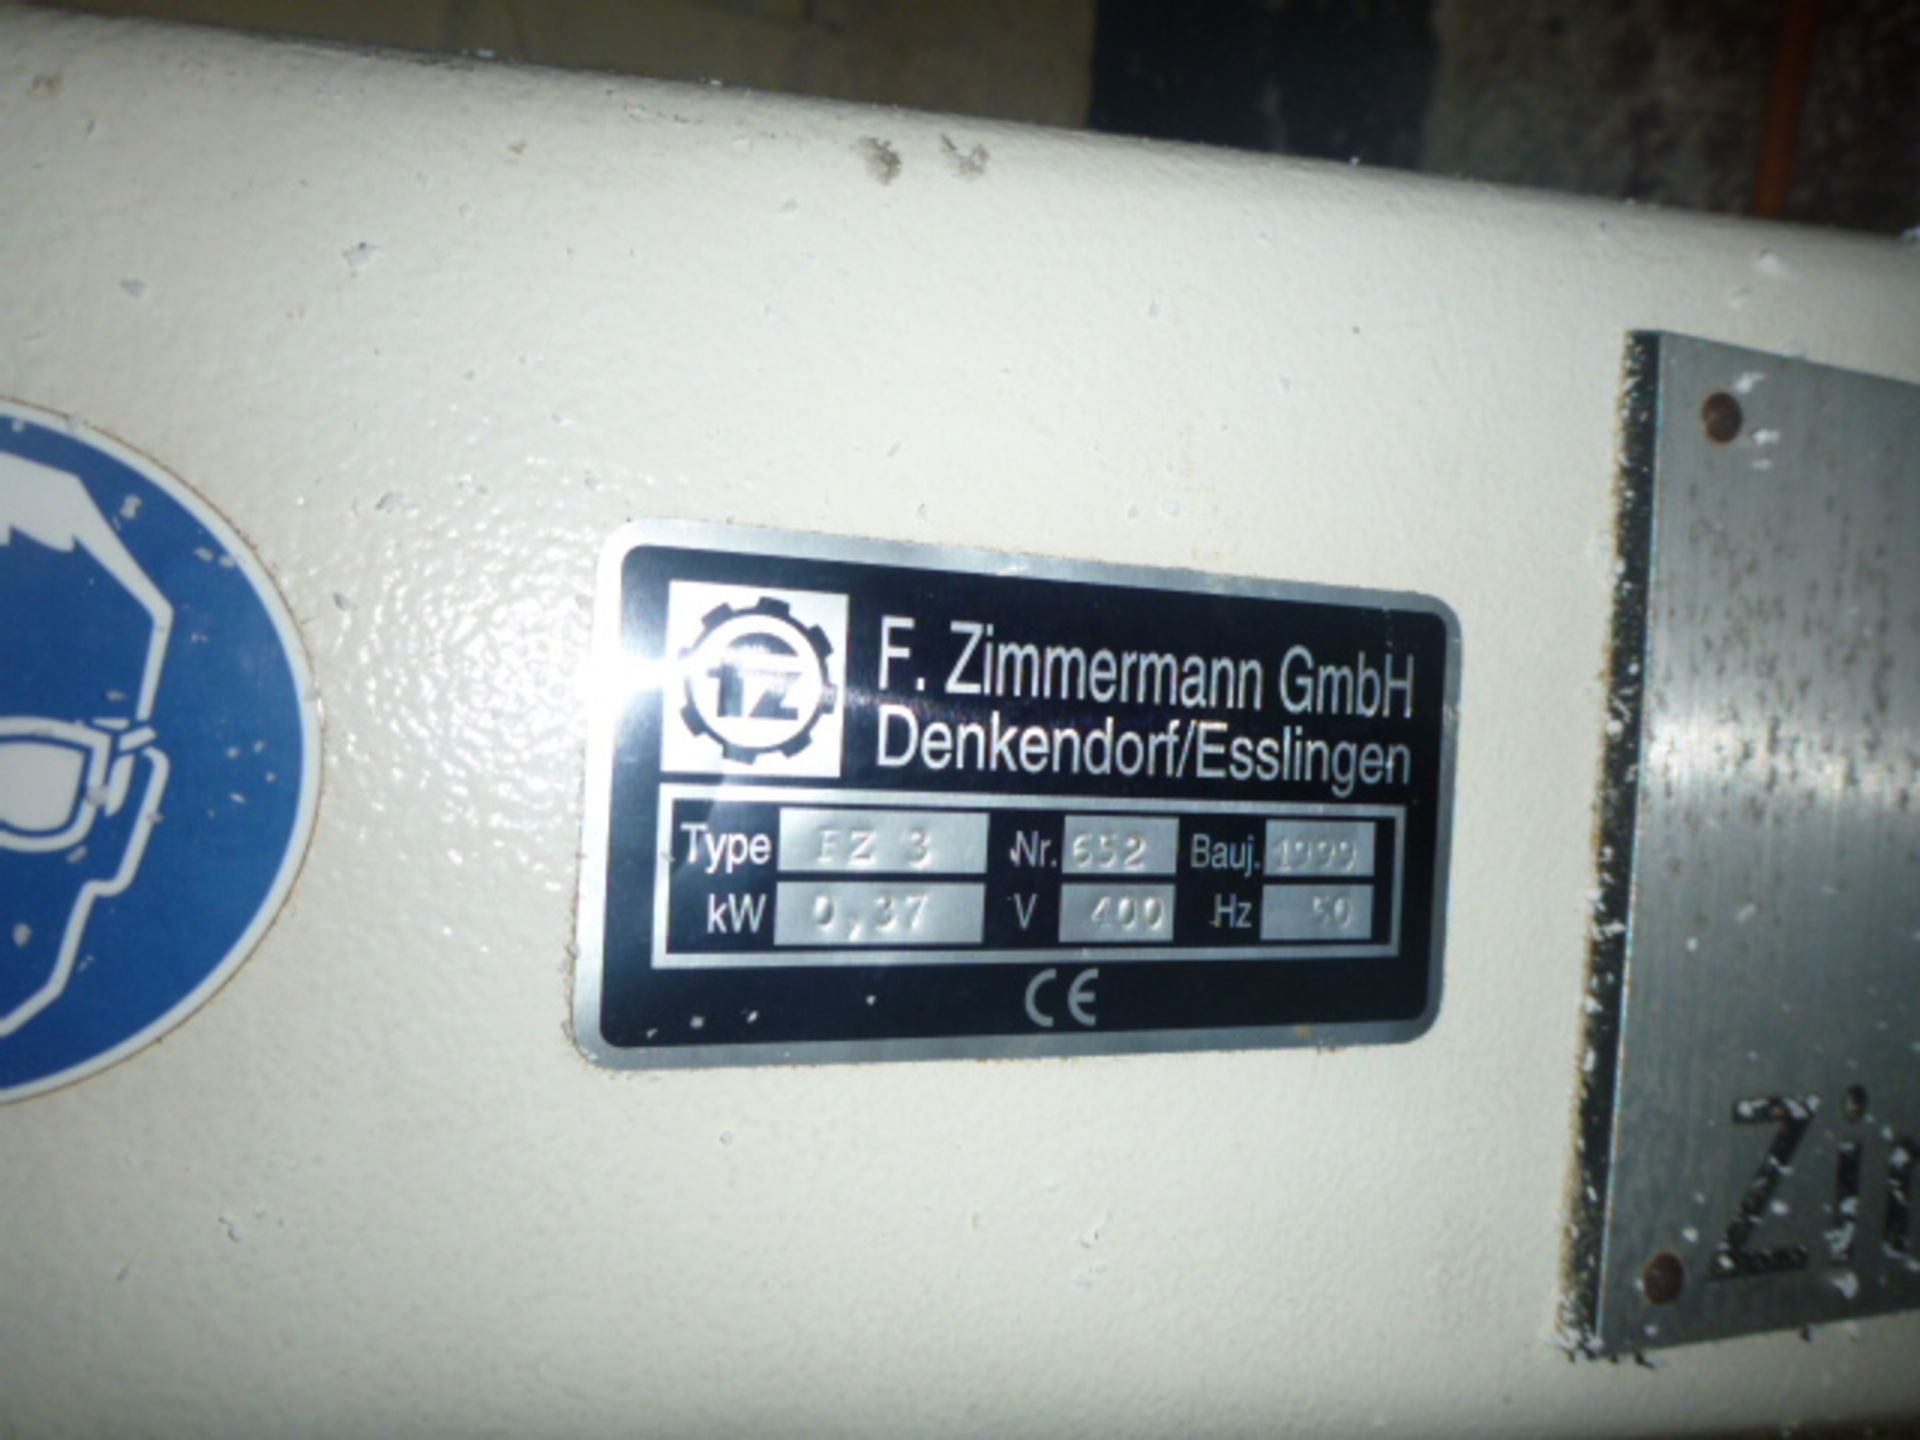 Zimmerman Wall Mounted Drill, Model F23. (Currently used for manual routing/carving). Serial No 652, - Image 4 of 4